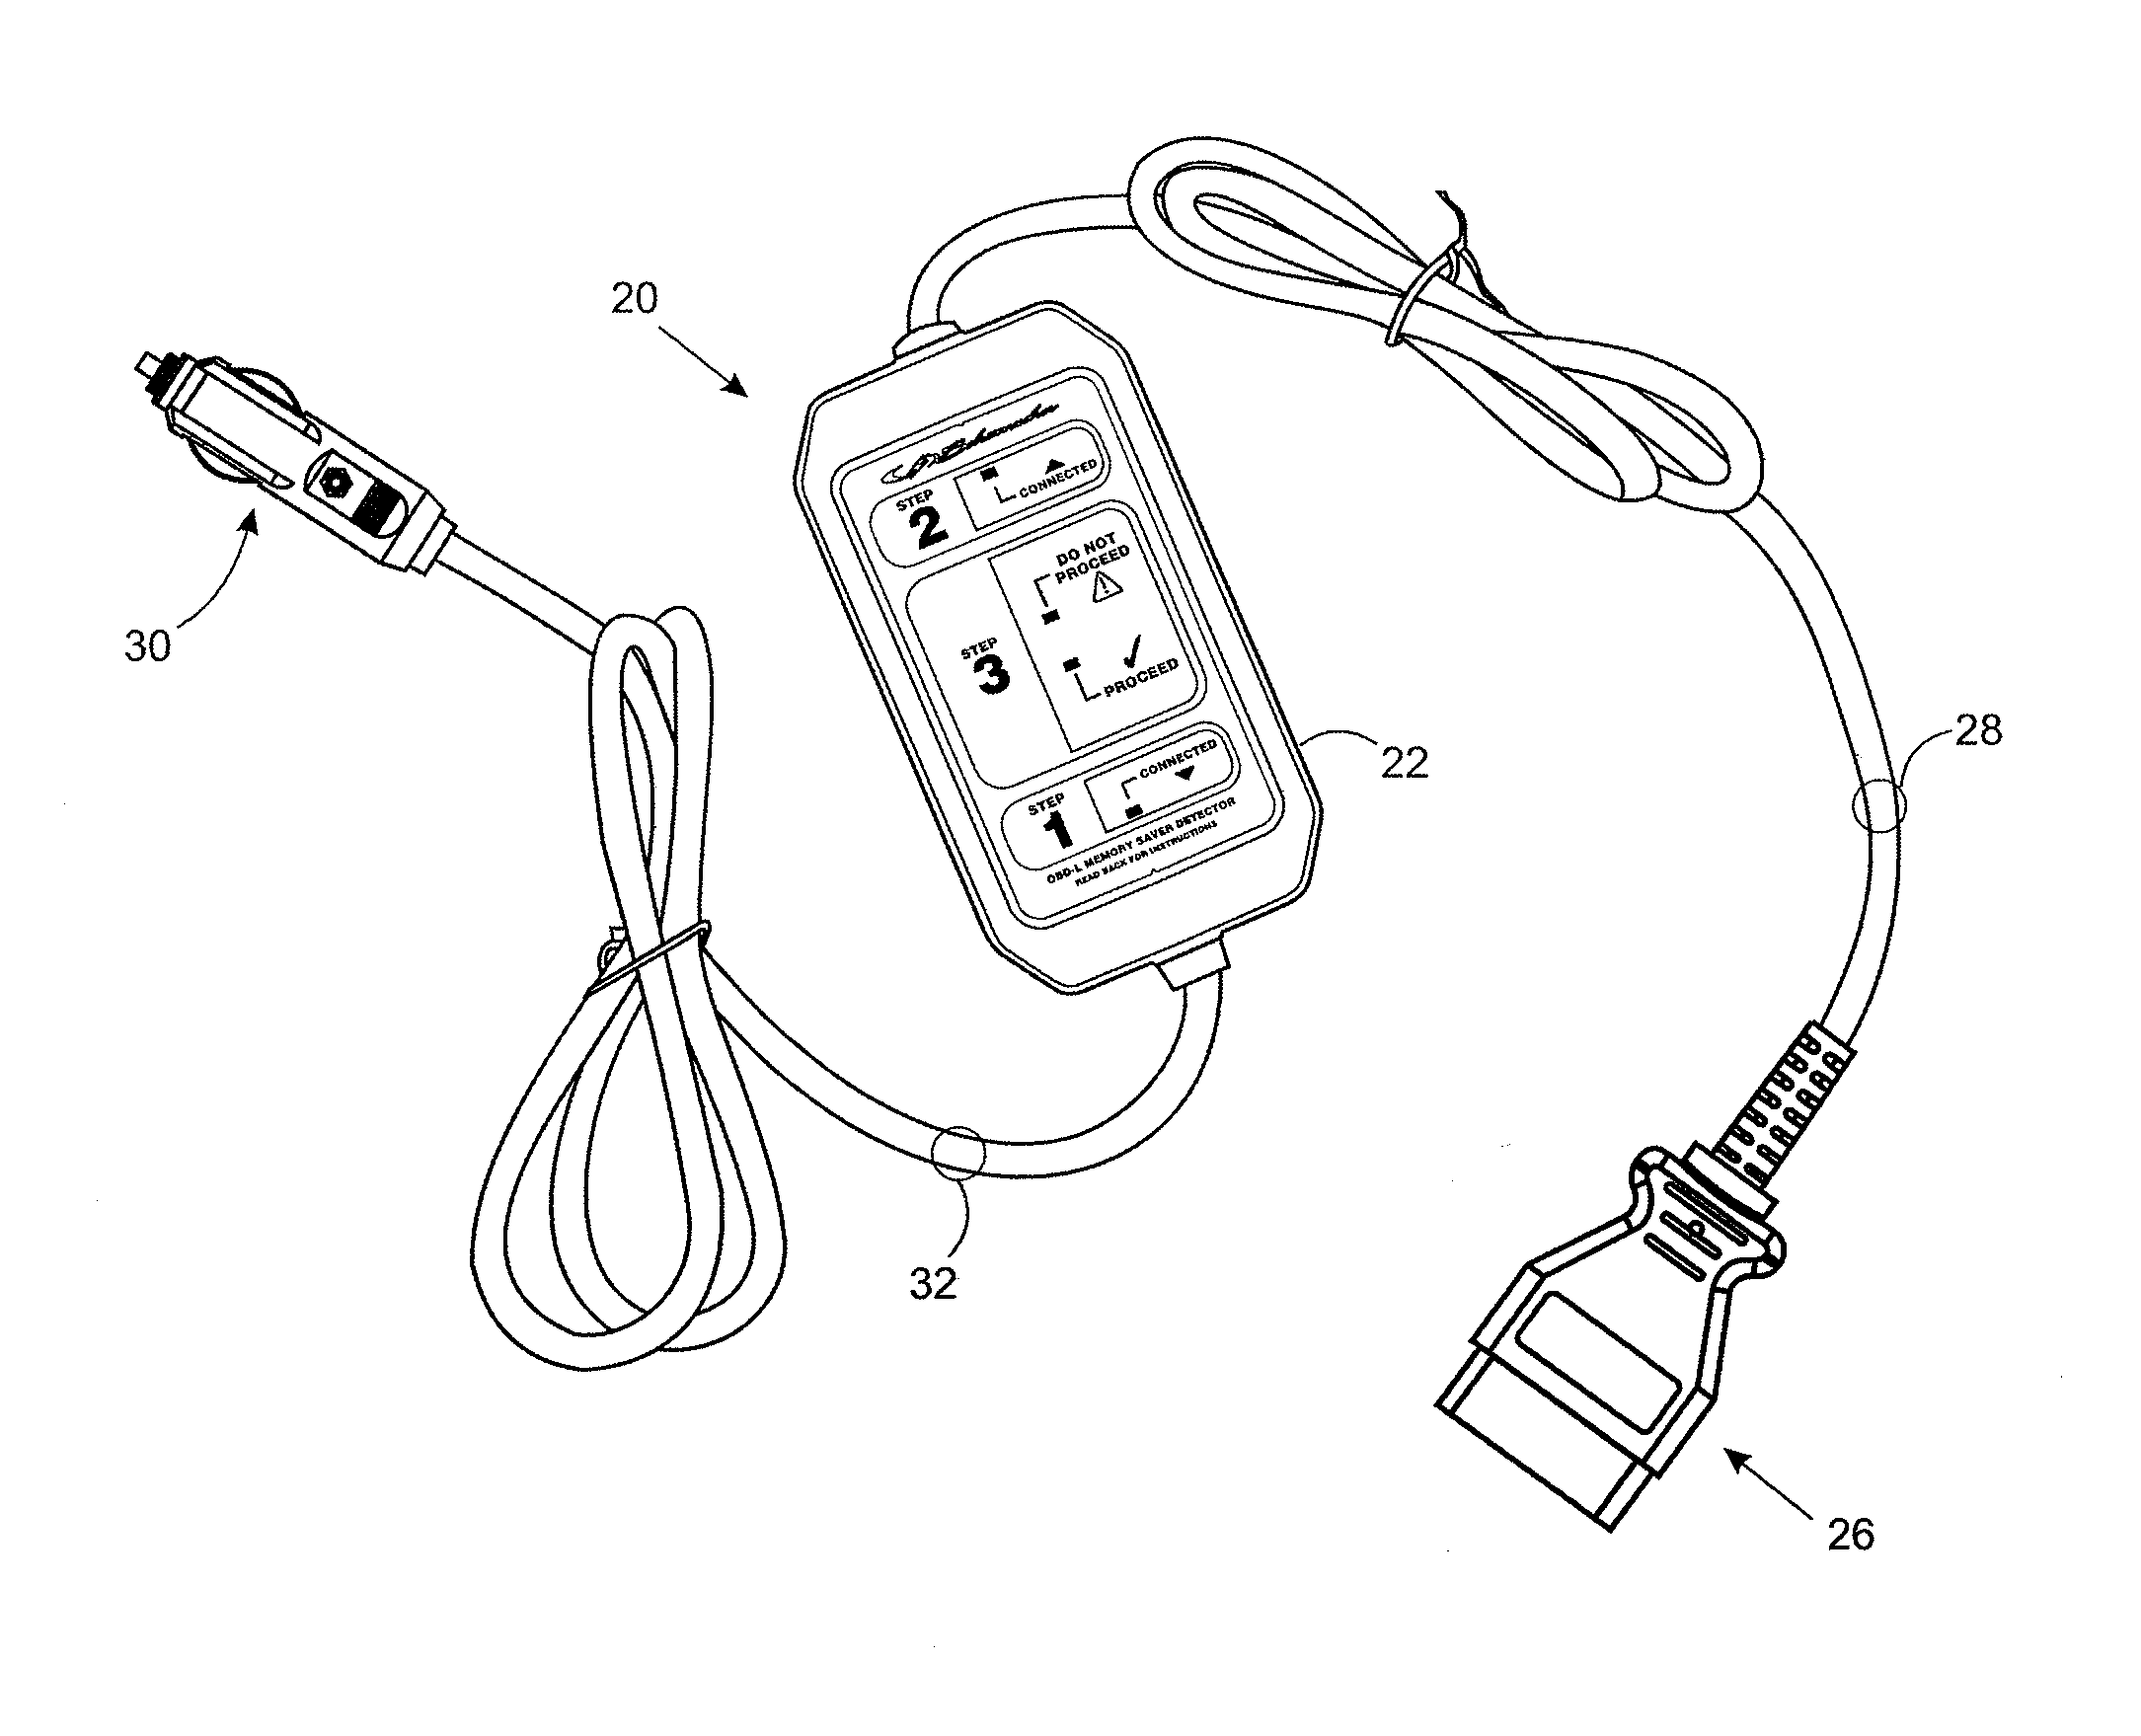 Interconnect device for detecting whether a vehicle on-board diagnostics (OBD) data port includes circuitry which prevents back feeding of power through the obd data port